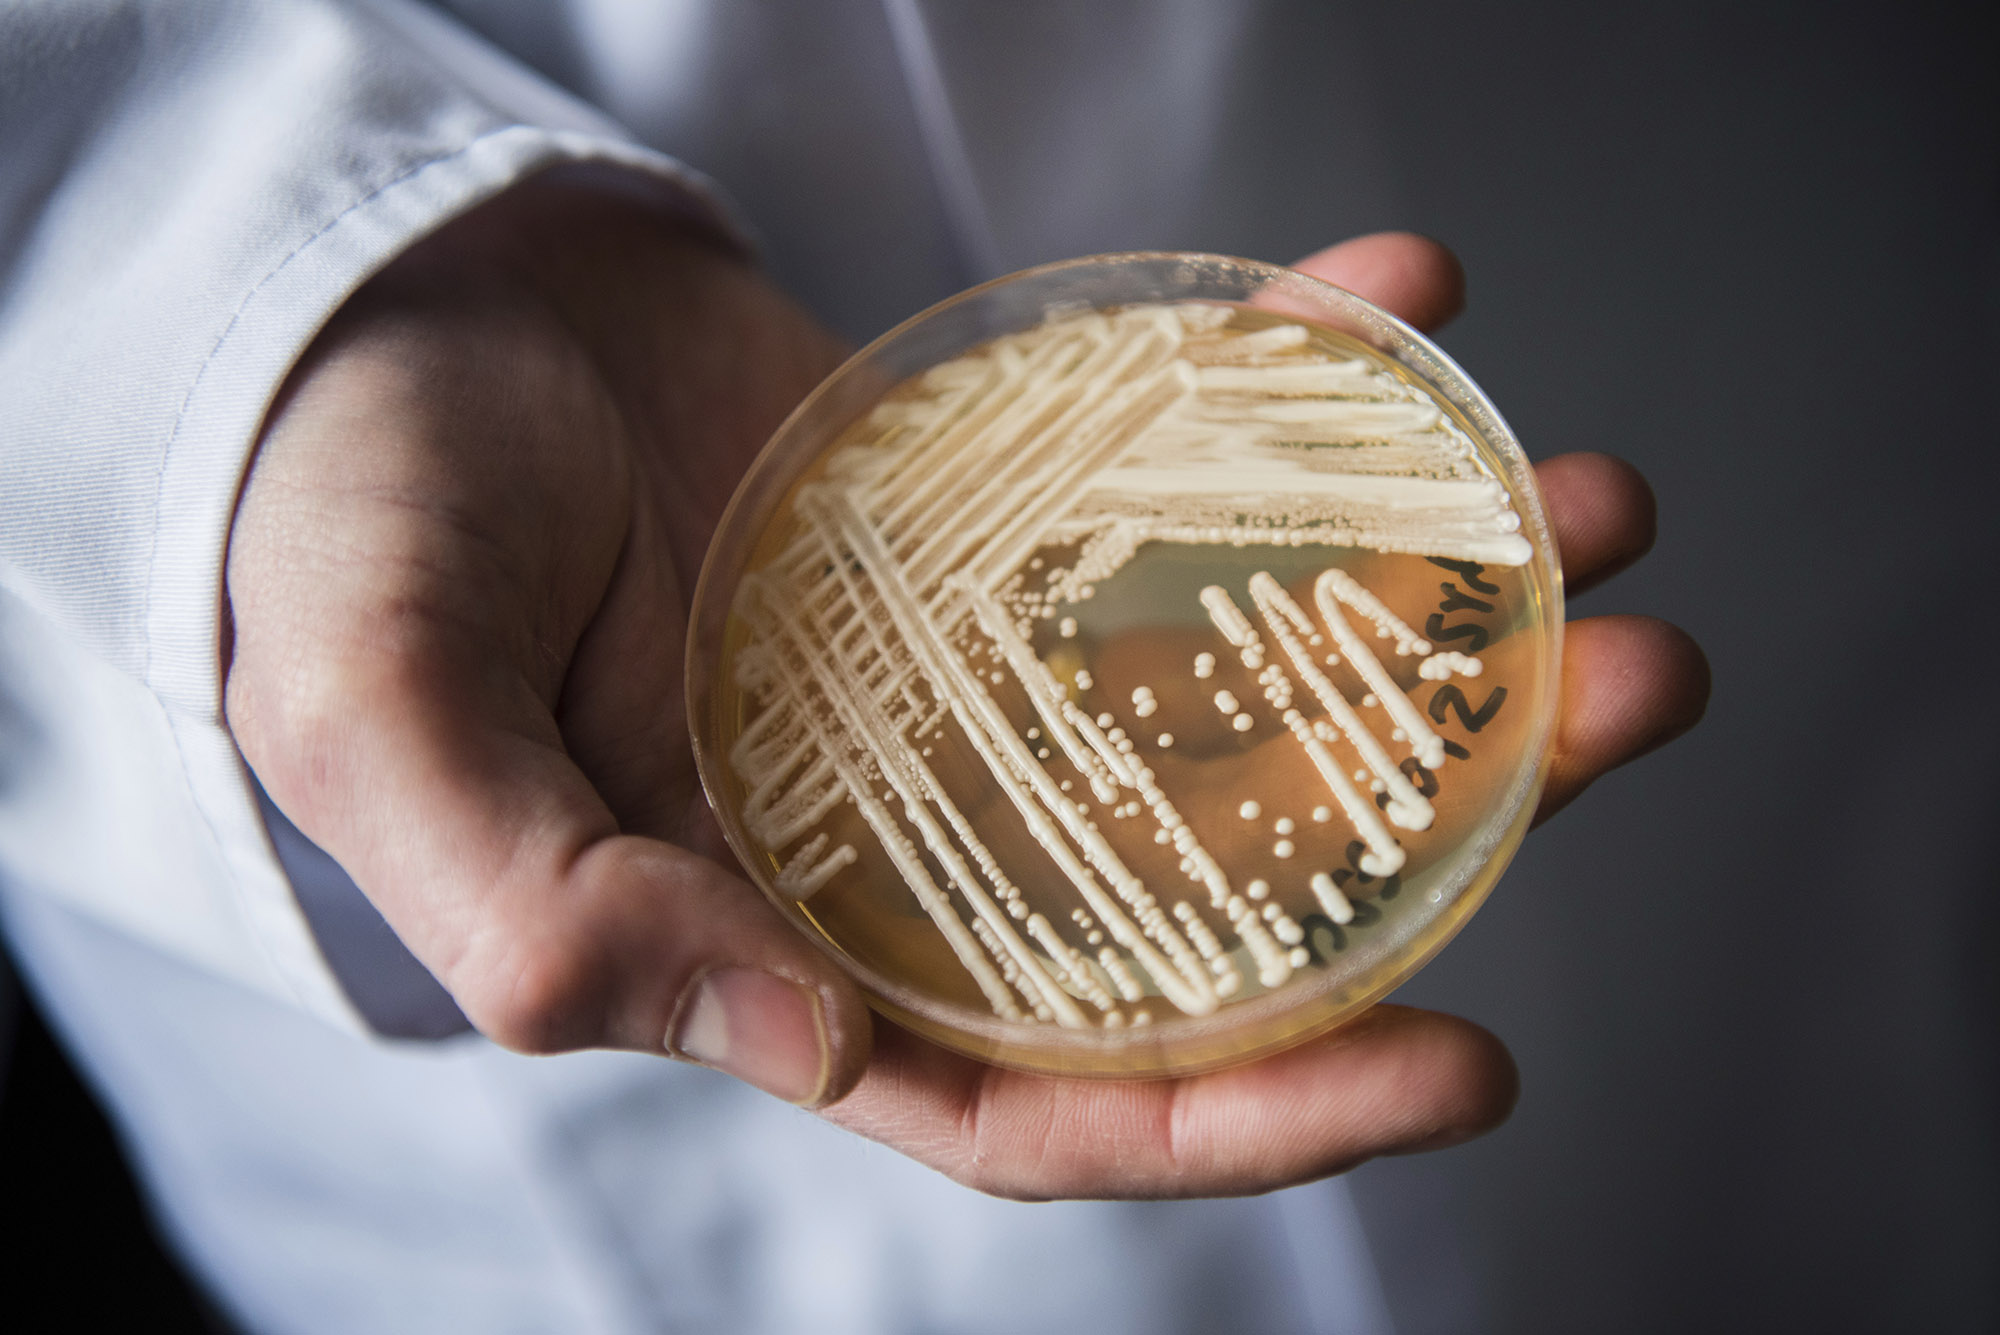 A New Drug-Resistant Fungus Is Spreading in Hospitals image